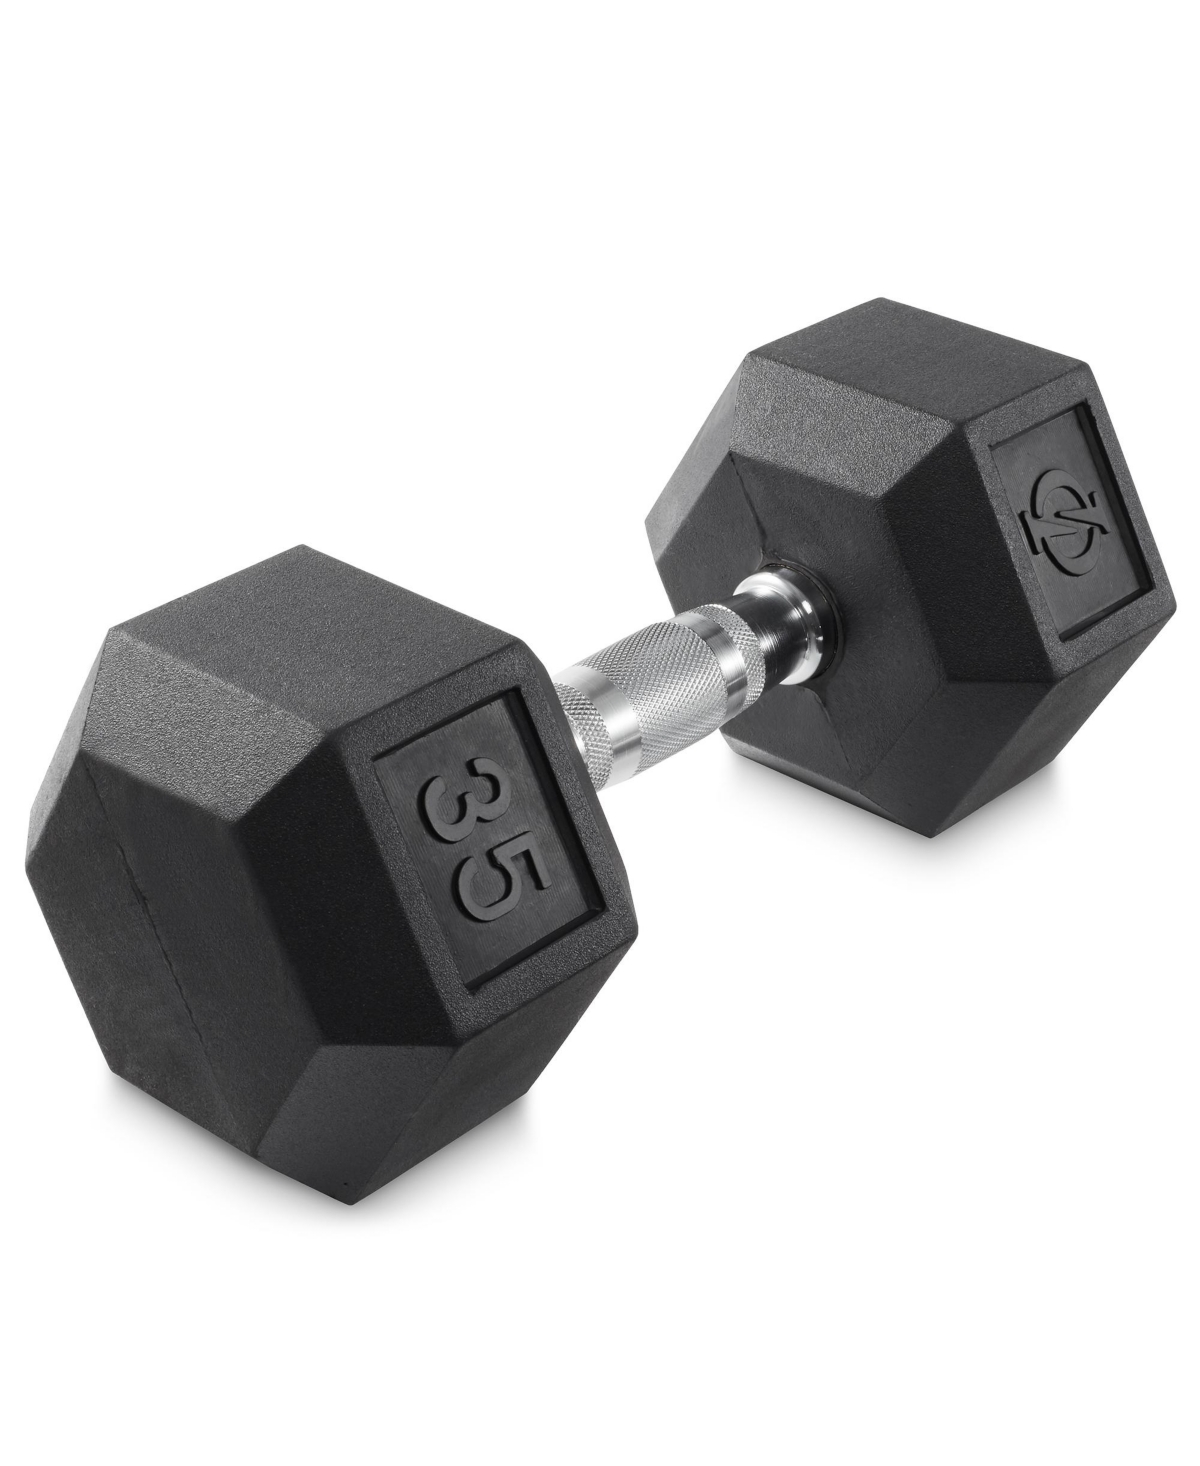 Rubber Coated Hex Dumbbell Hand Weight, 35 lbs - Black